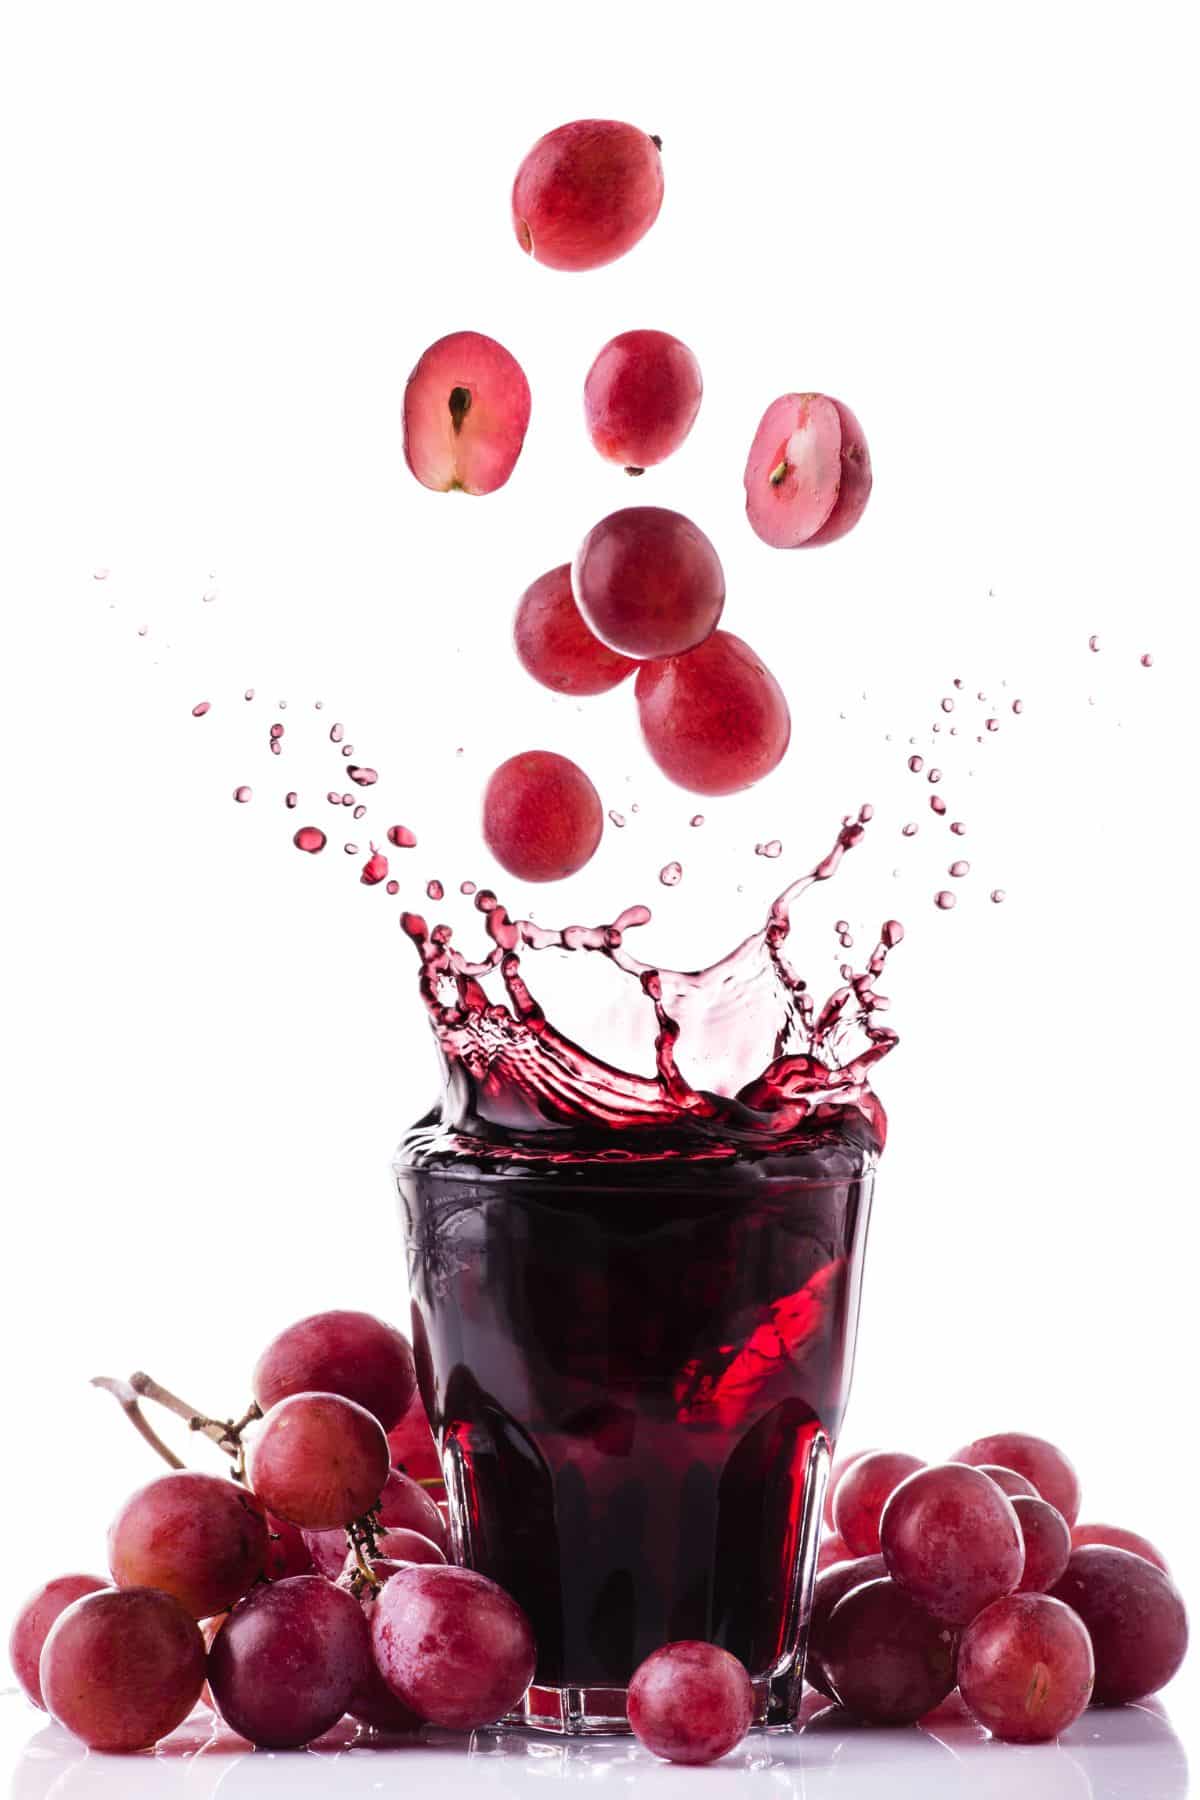 grapes falling into a glass of grape juice.